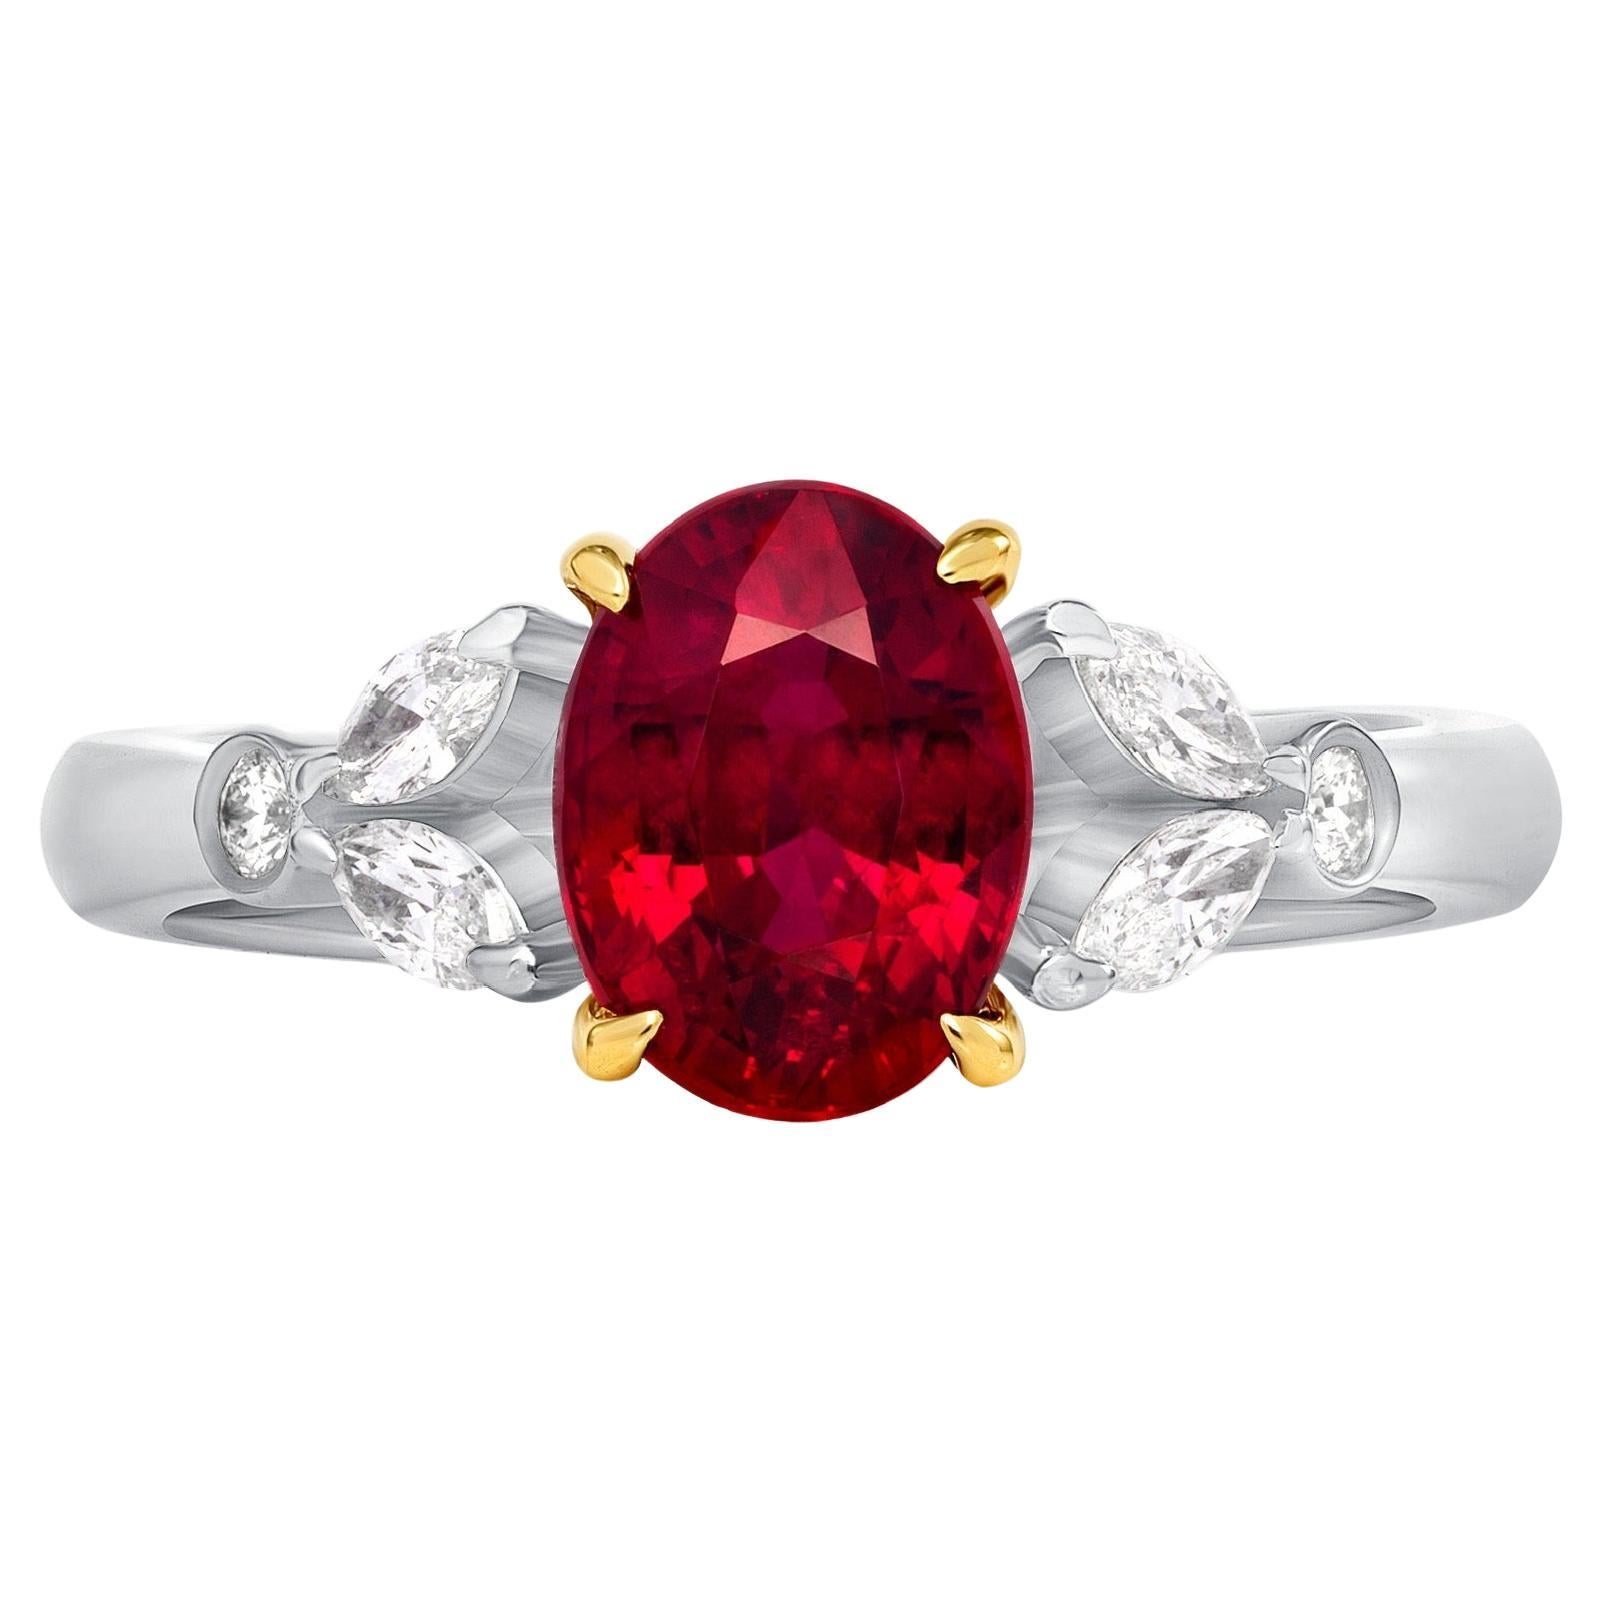 2.03ct oval, Mozambique Ruby ring. GIA certified. For Sale